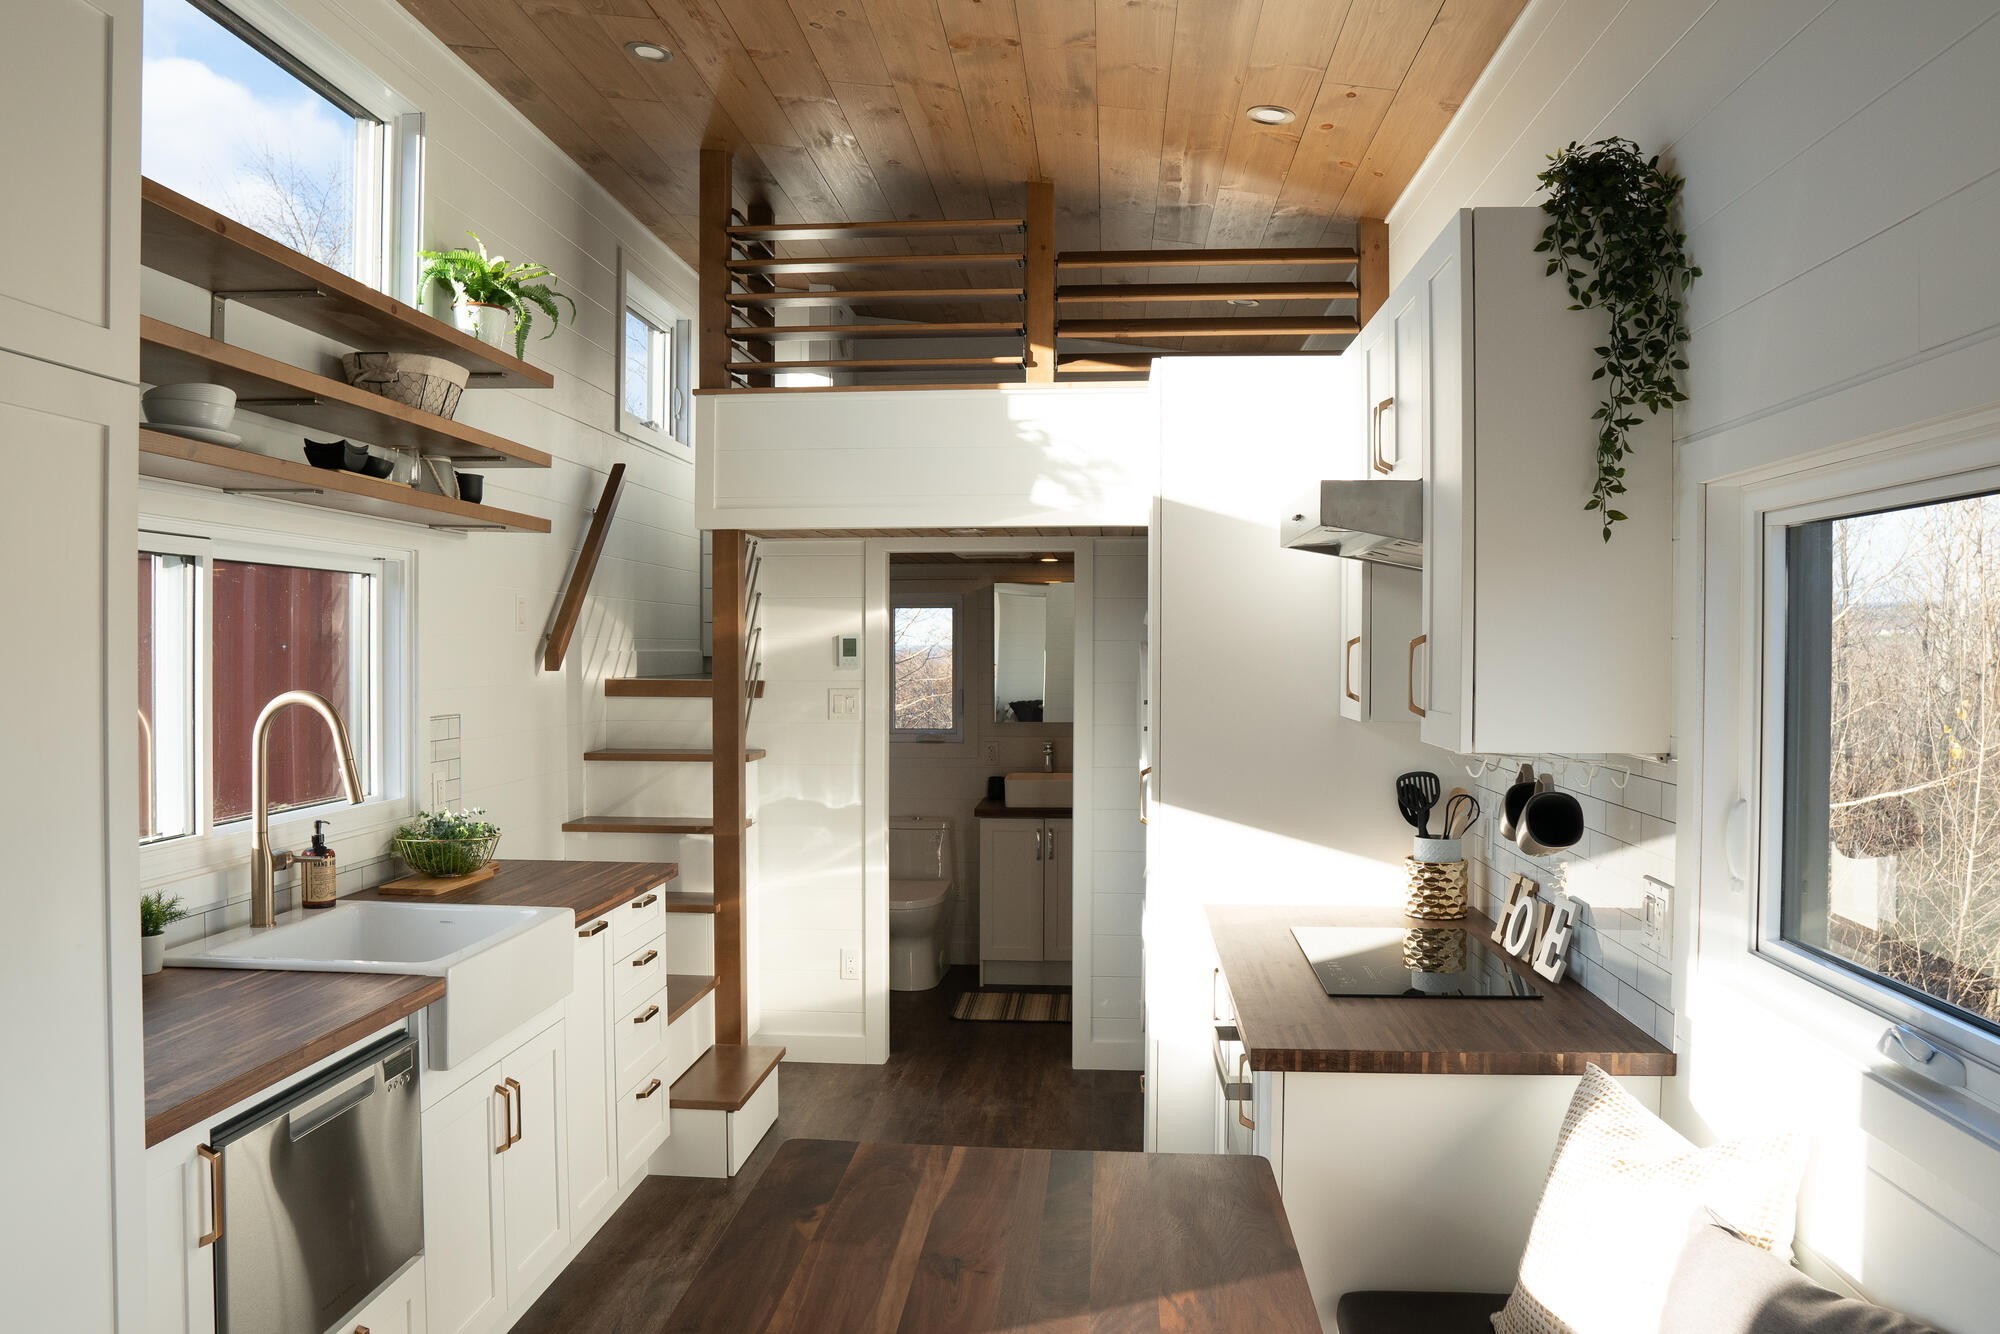 Three-Bedroom Tiny Home Has Everything a Family of Six Could